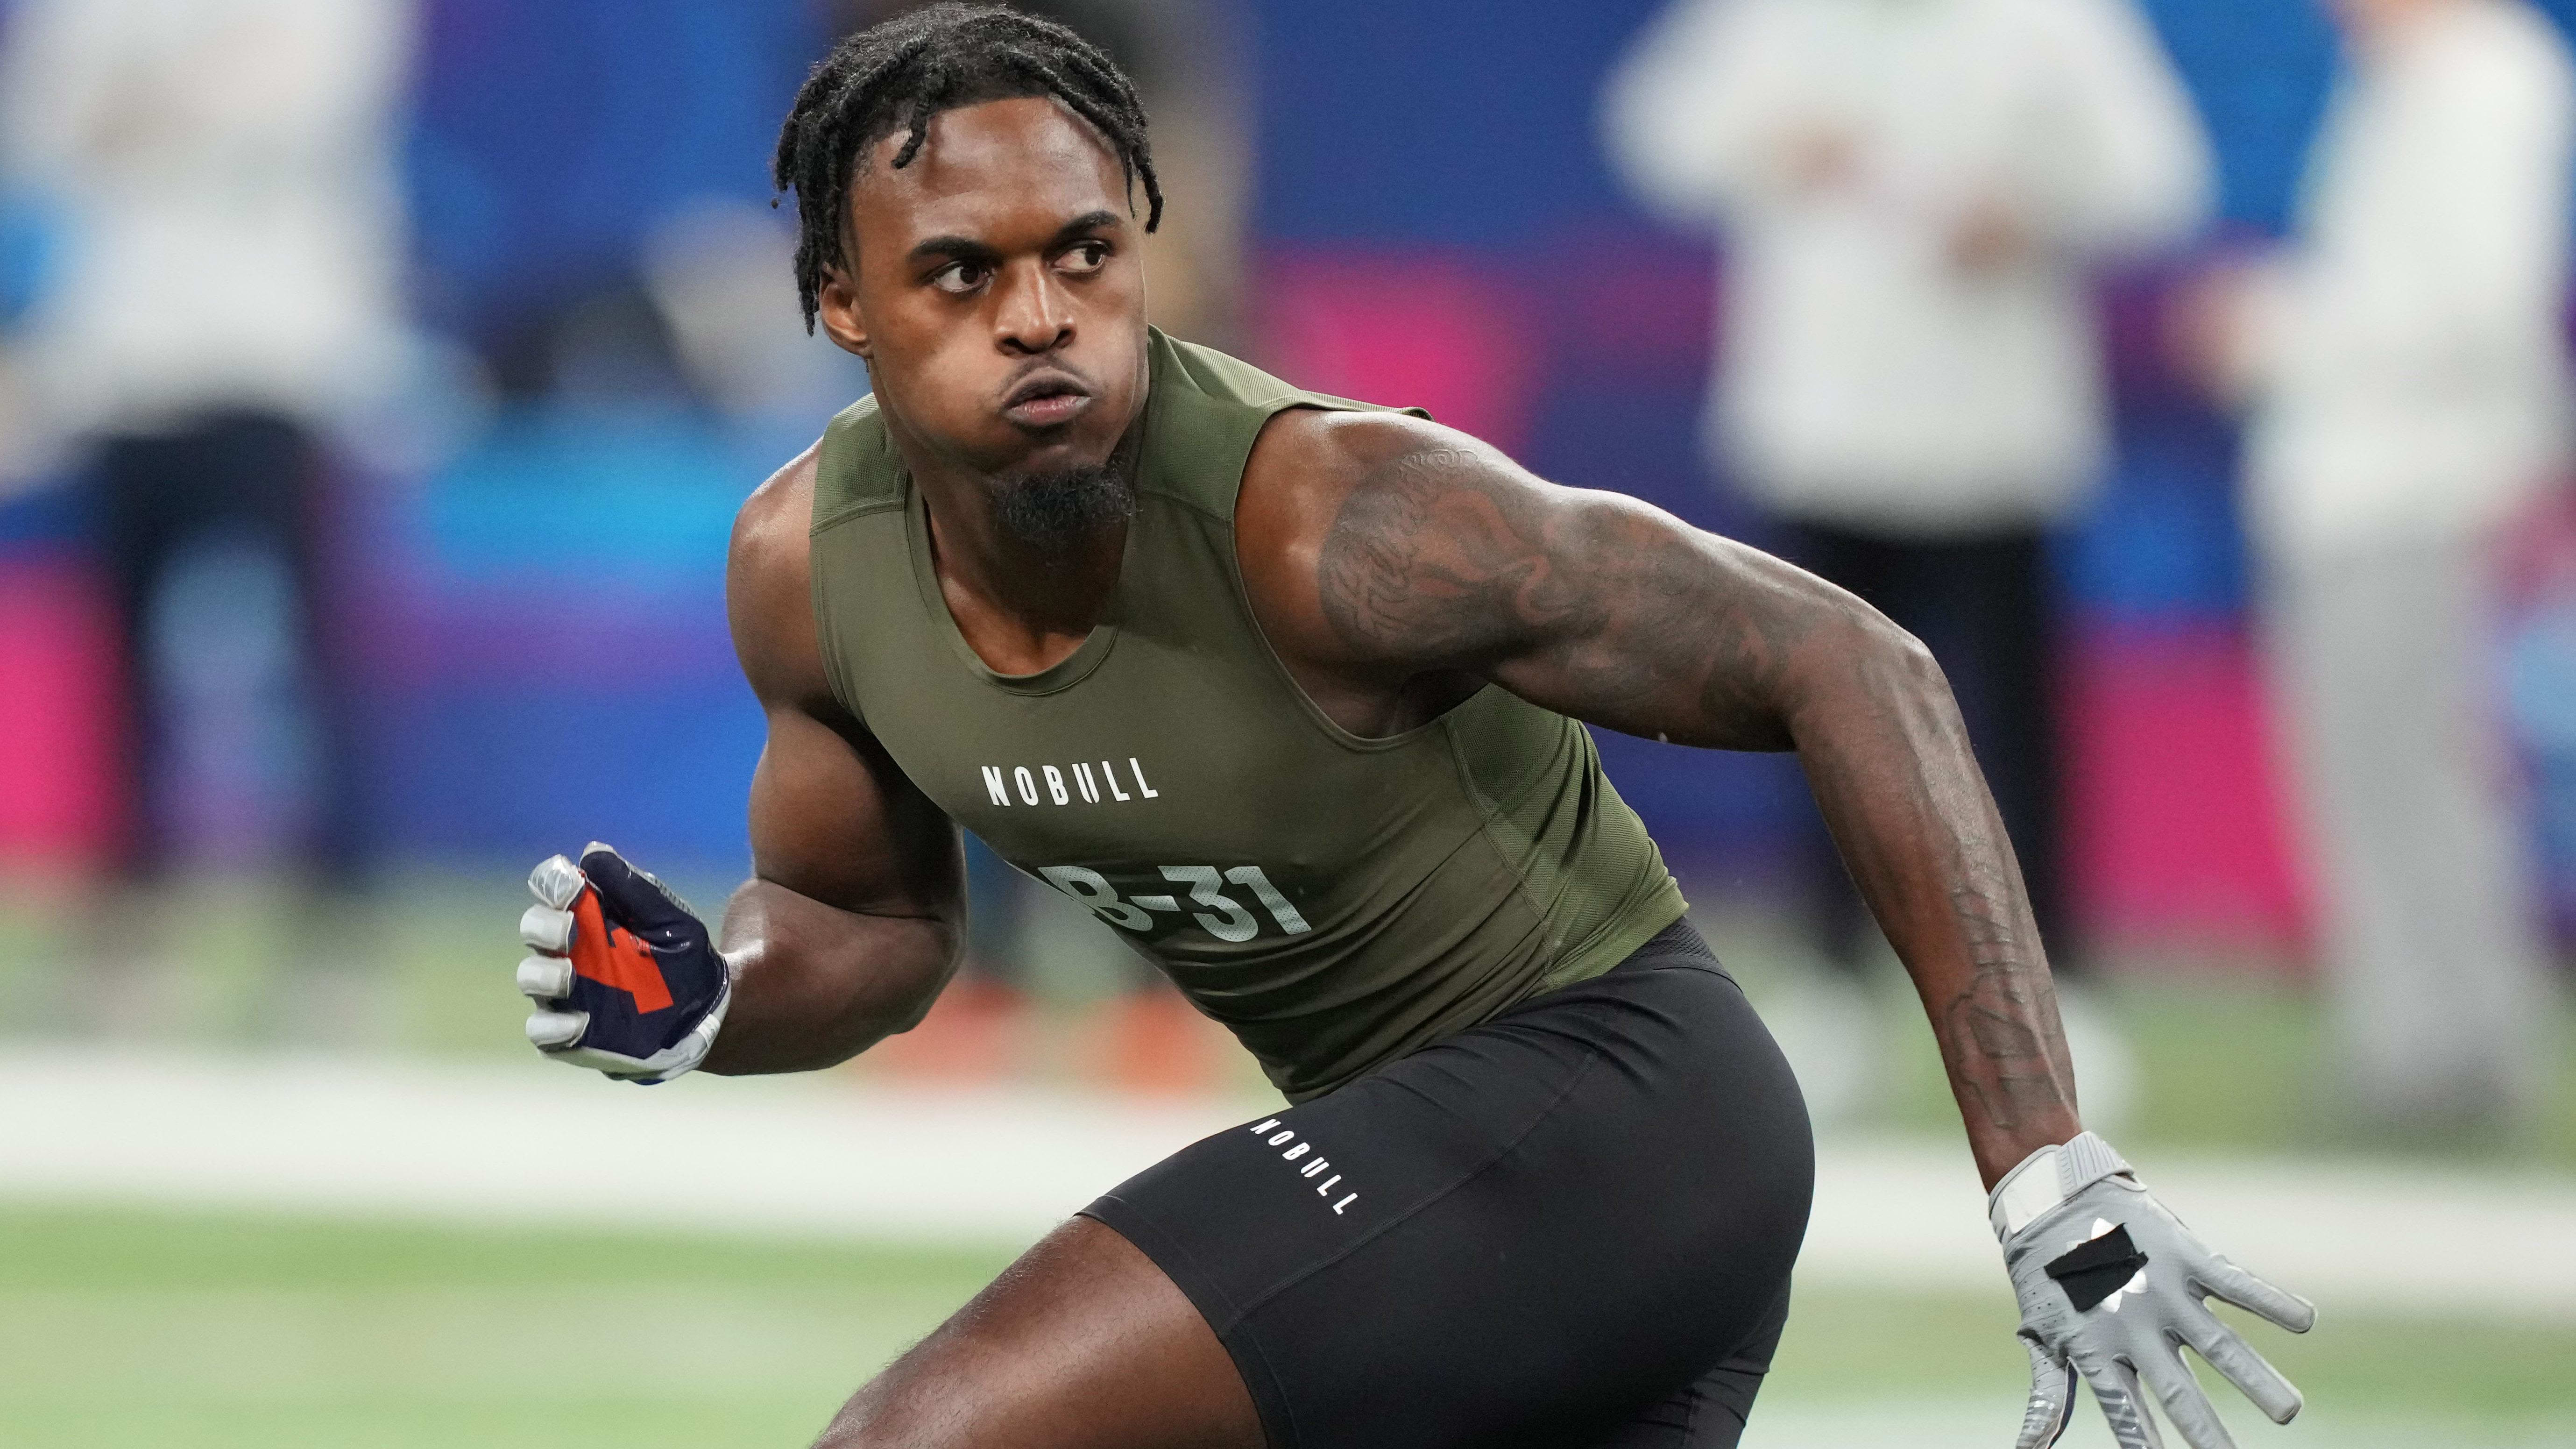 Former Auburn Tiger Predicted To Land In The NFC In Latest NFL Mock Draft